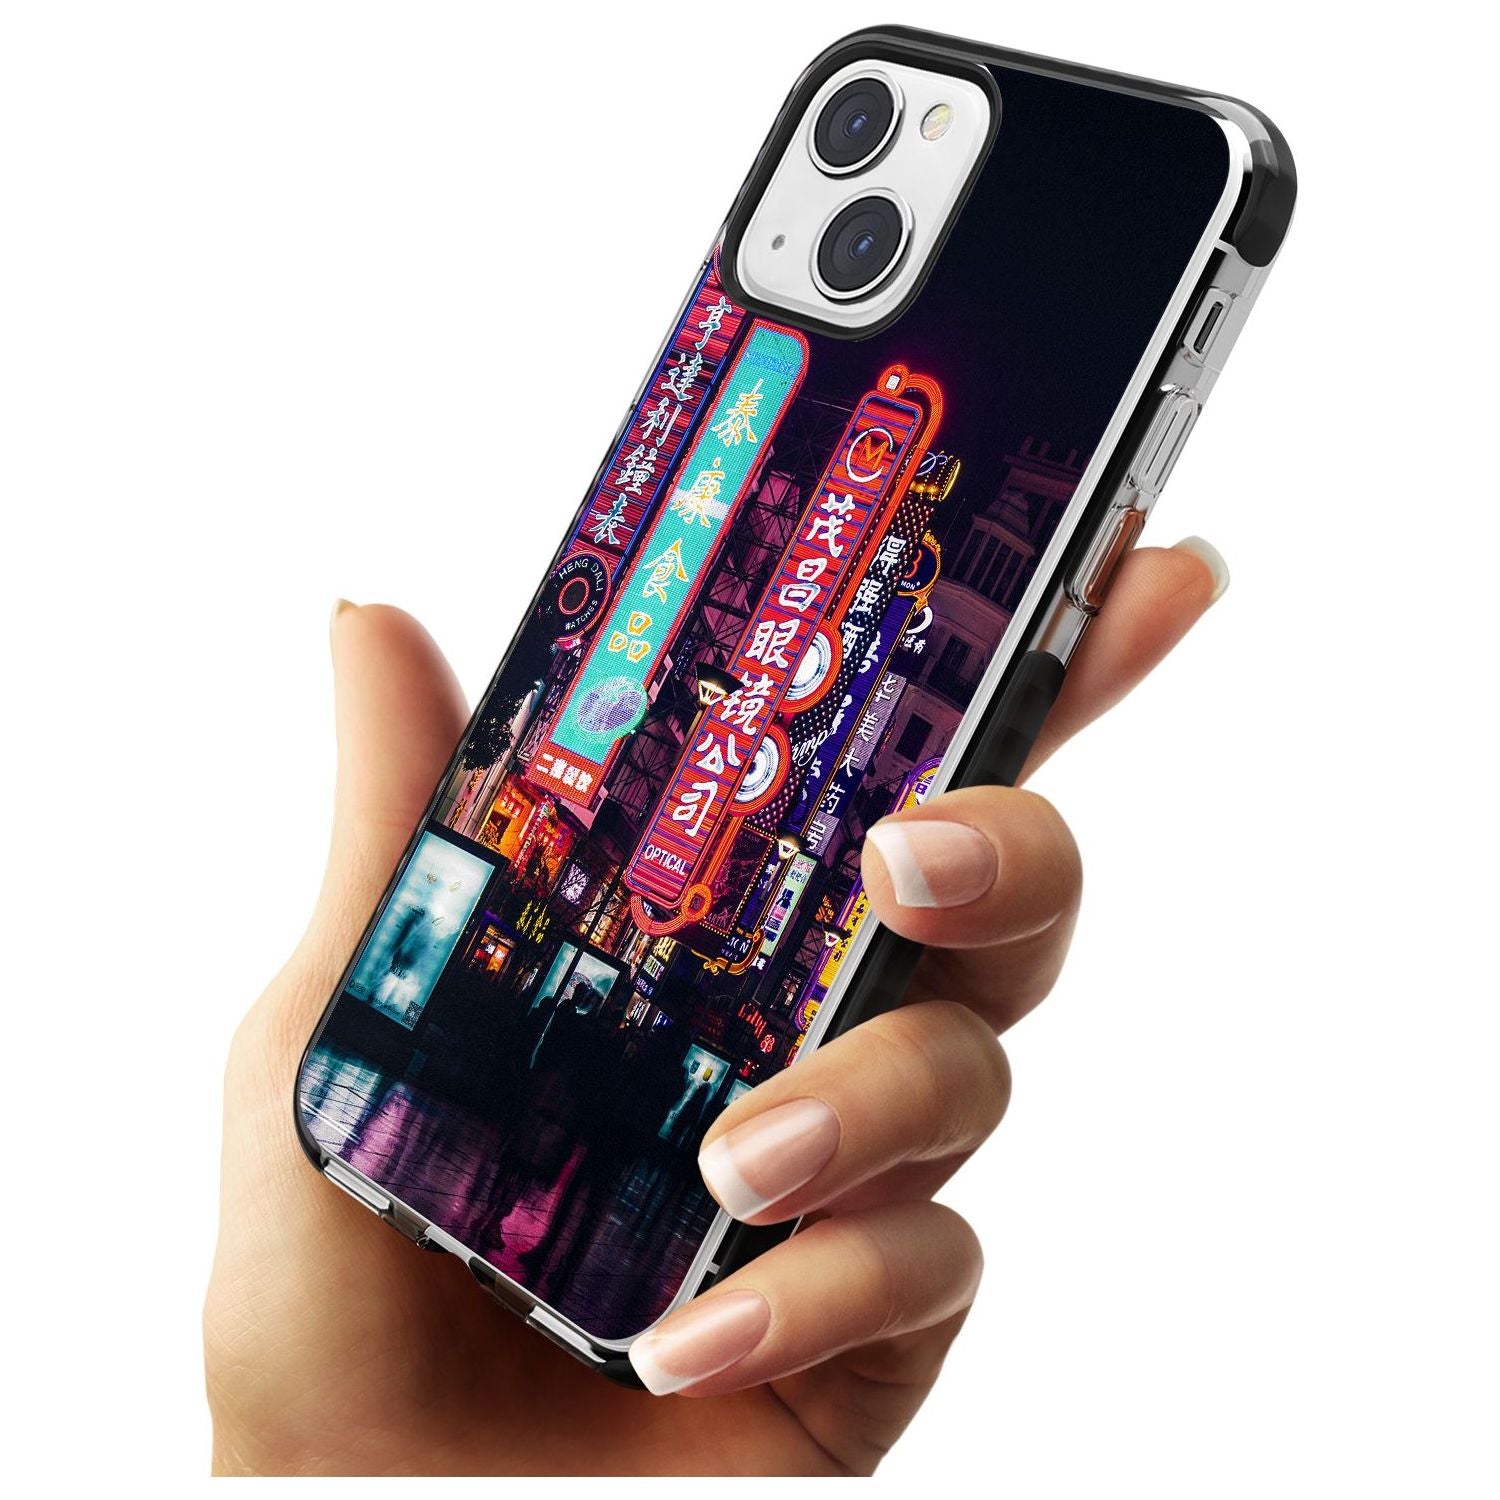 Busy Street - Neon Cities Photographs Phone Case iPhone 15 Pro Max / Black Impact Case,iPhone 15 Plus / Black Impact Case,iPhone 15 Pro / Black Impact Case,iPhone 15 / Black Impact Case,iPhone 15 Pro Max / Impact Case,iPhone 15 Plus / Impact Case,iPhone 15 Pro / Impact Case,iPhone 15 / Impact Case,iPhone 15 Pro Max / Magsafe Black Impact Case,iPhone 15 Plus / Magsafe Black Impact Case,iPhone 15 Pro / Magsafe Black Impact Case,iPhone 15 / Magsafe Black Impact Case,iPhone 14 Pro Max / Black Impact Case,iPhone